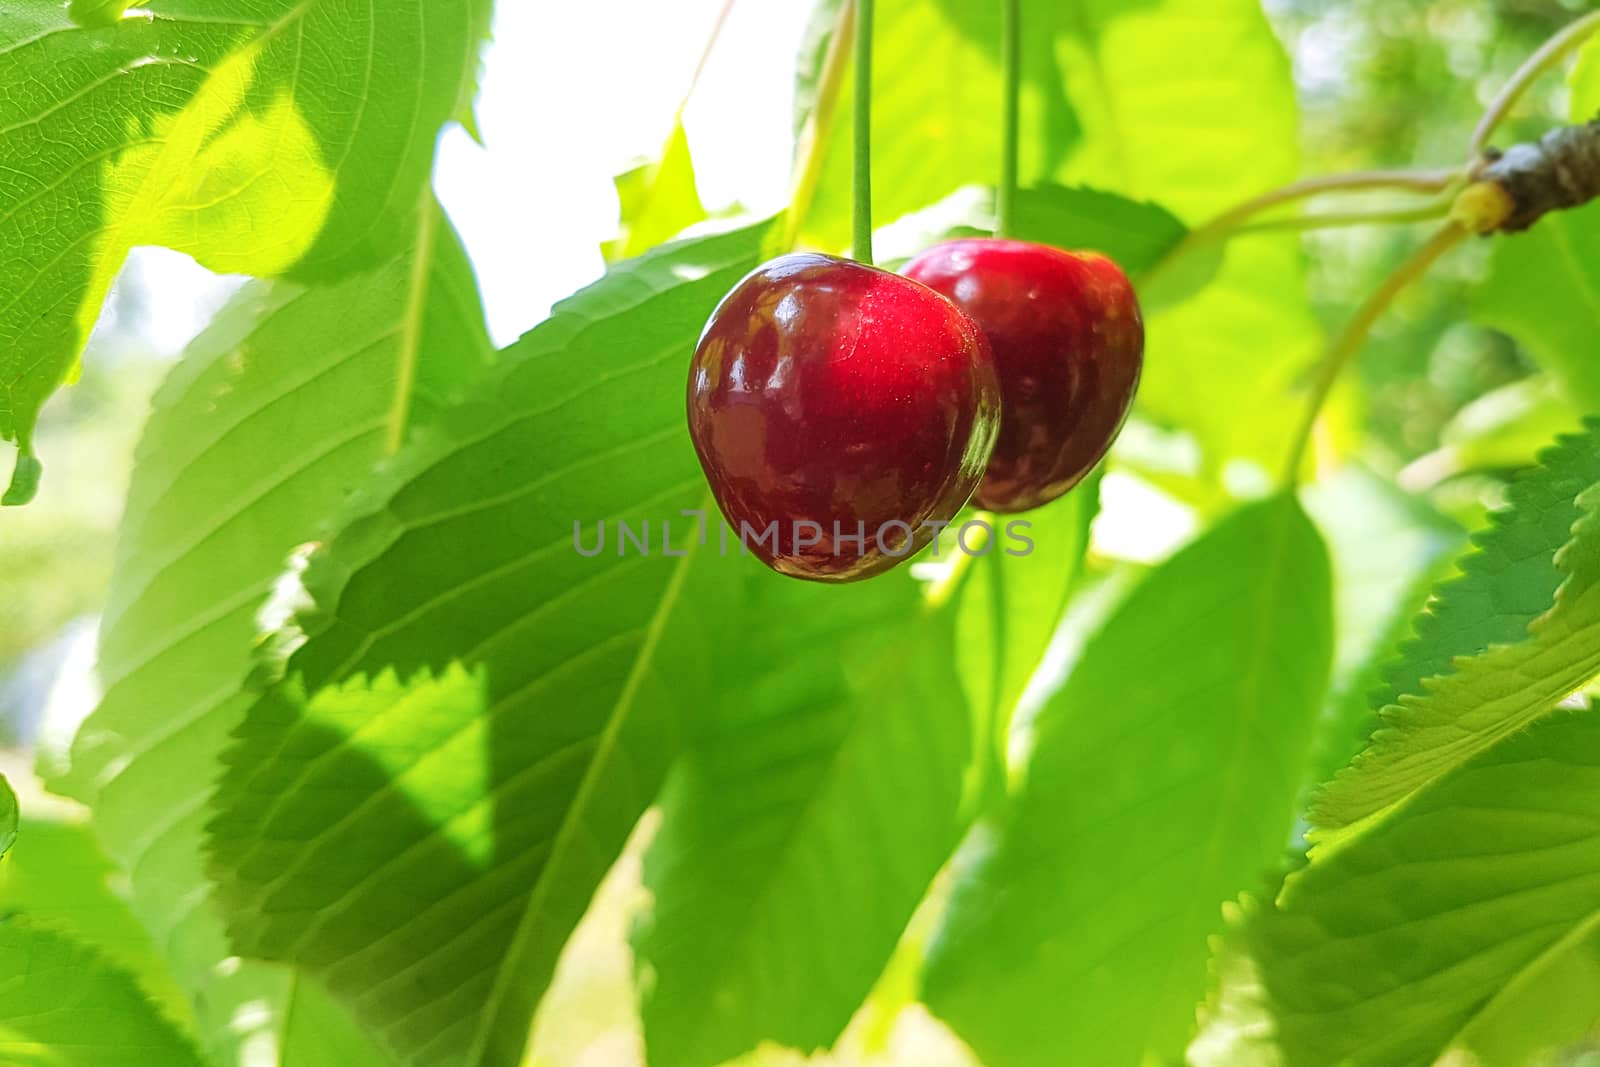 Ripe and sweet cherries on a branch on a background of fresh and green leaves on a sunny day